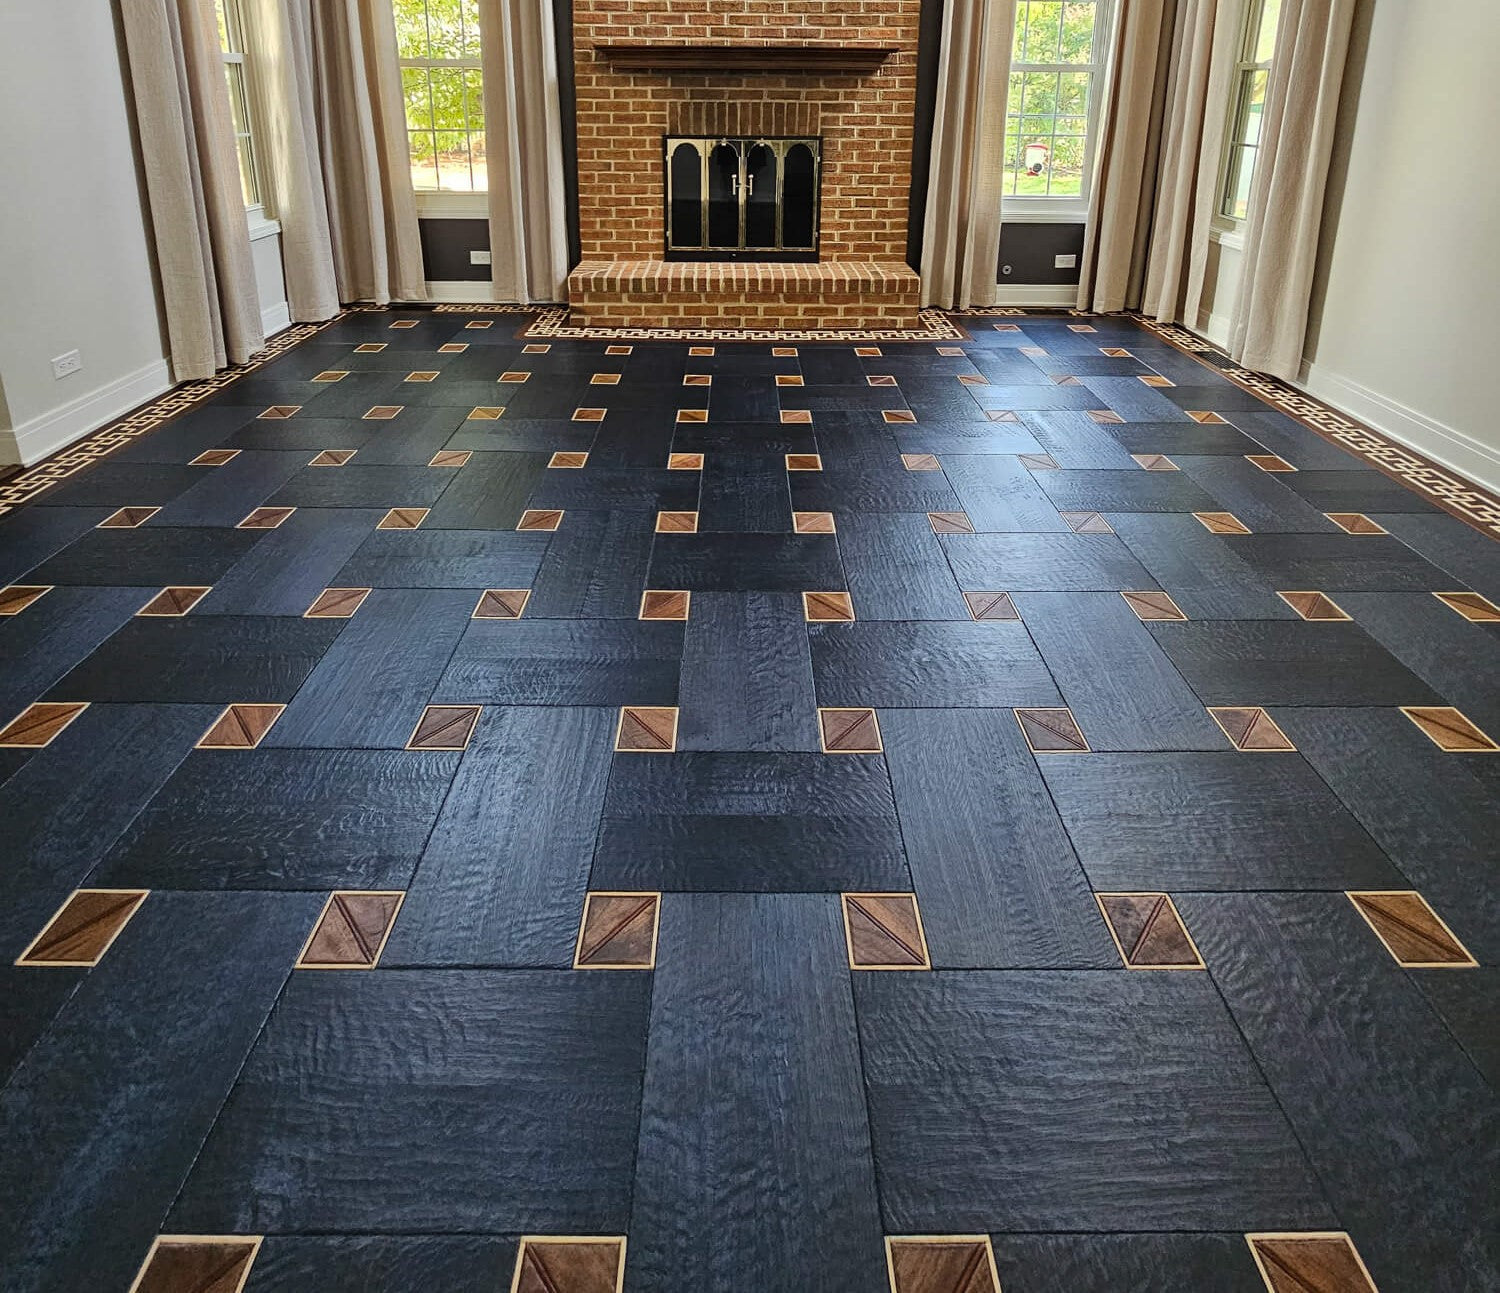 Stunning parquet wood floor inspiration featuring white oak, walnut, maple, and bubinga woods! It was finished using Rubio Monocoat wood finish products including Pre-Aging and Oil Plus 2C.